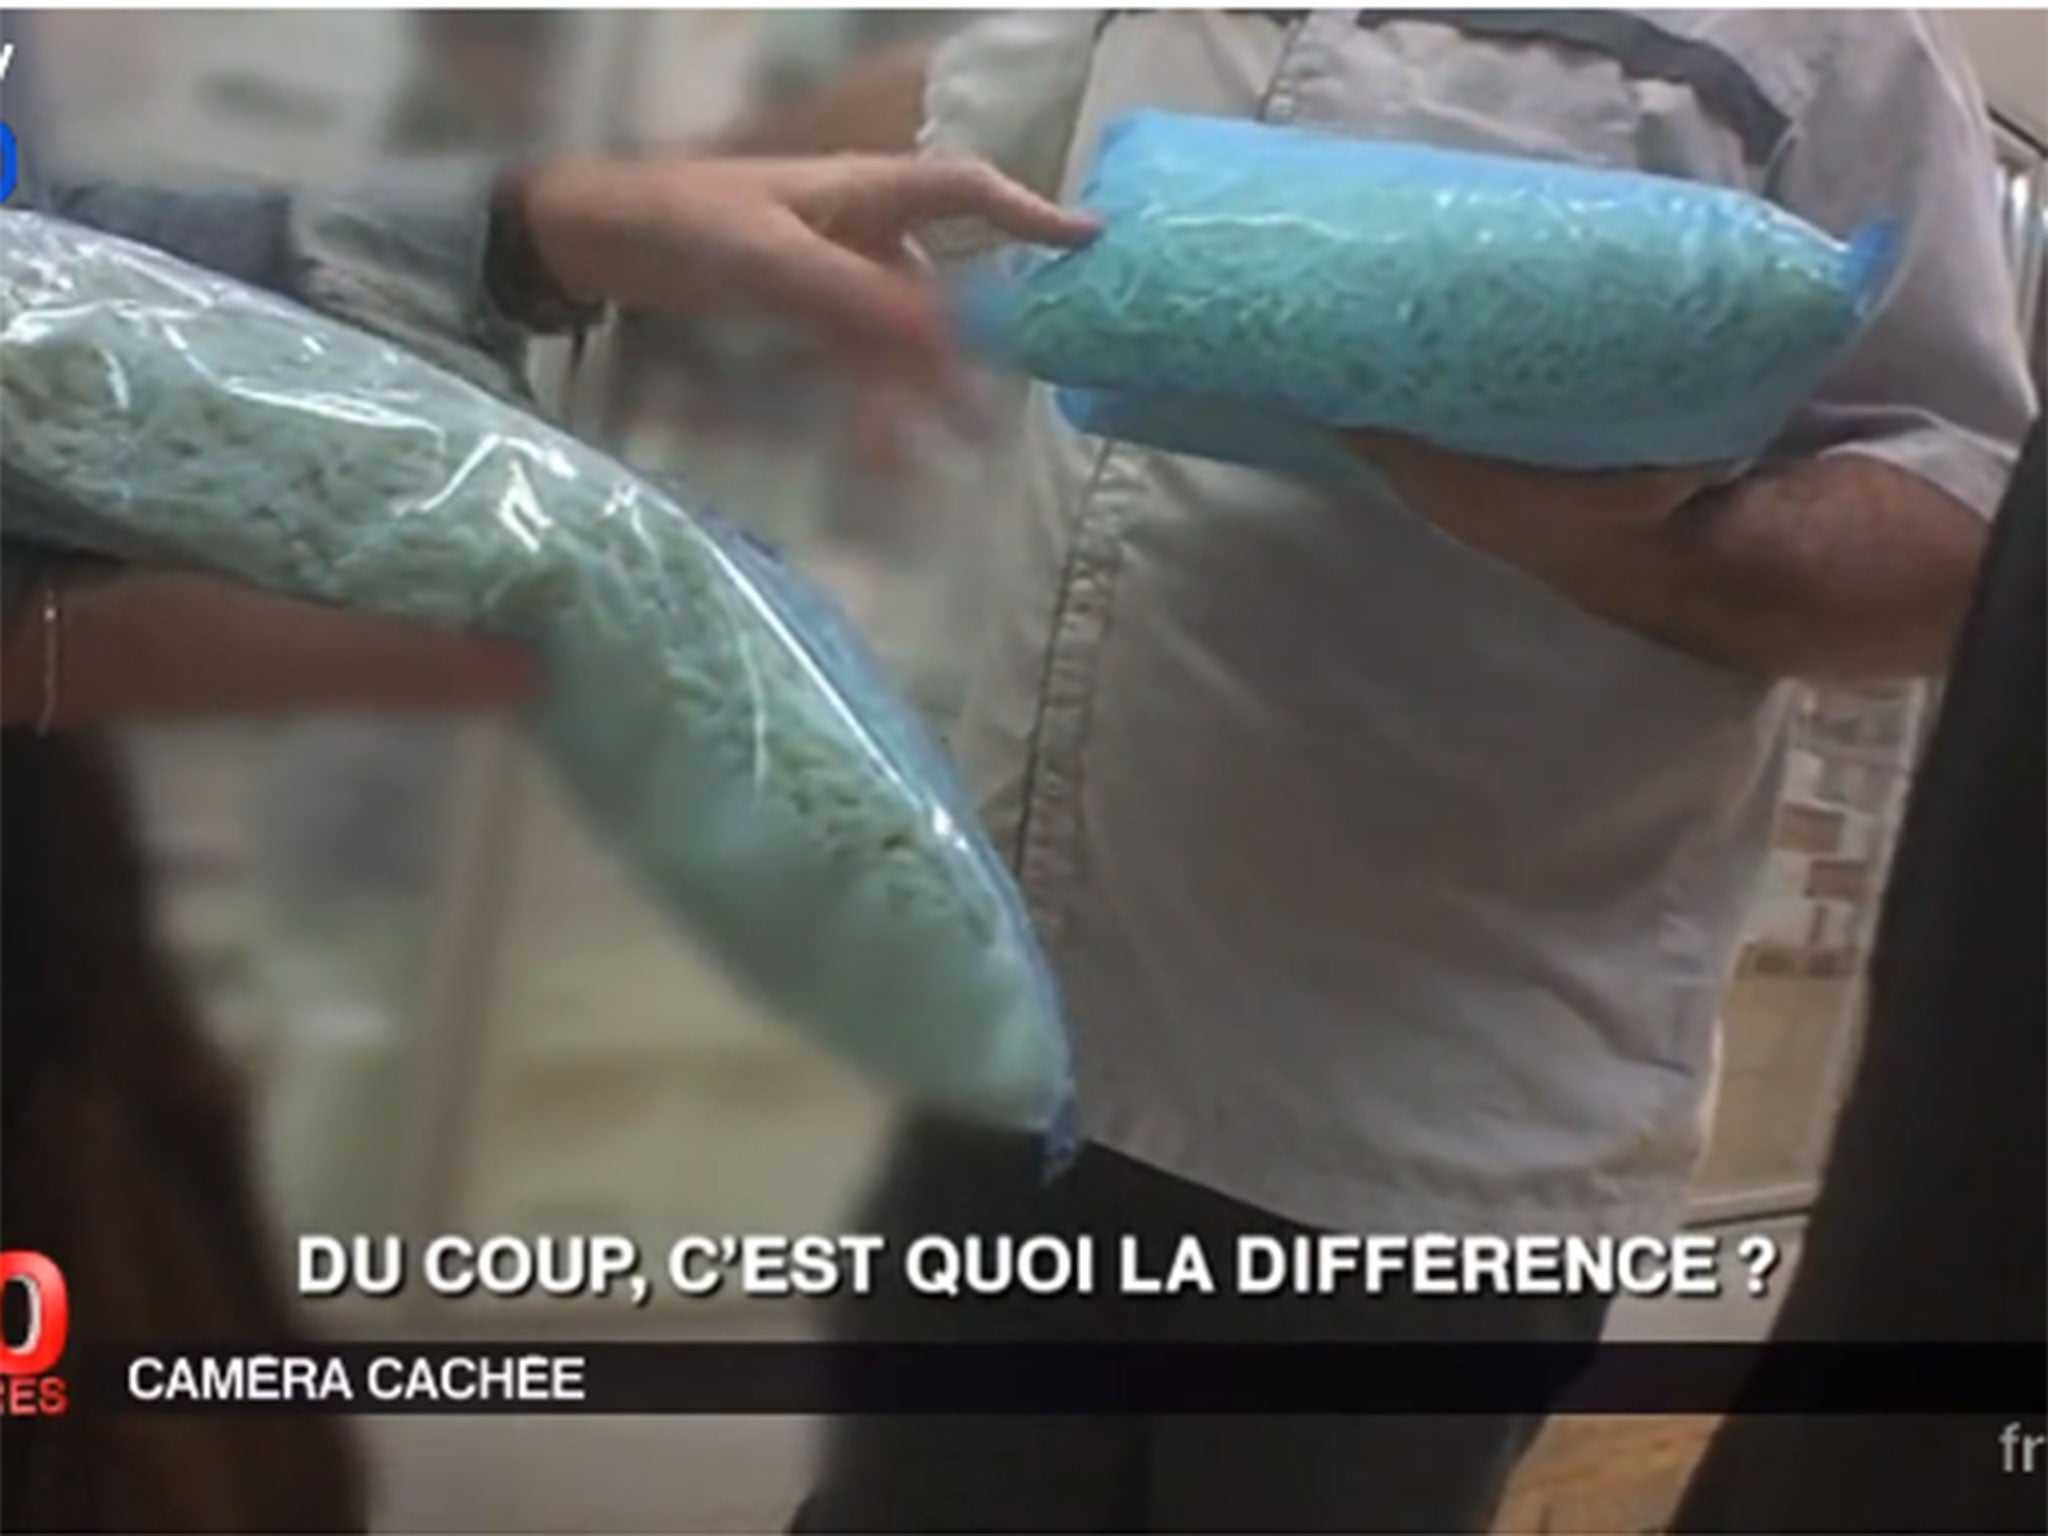 Screengrab from France 2's report showing undercover reporting inside the factory